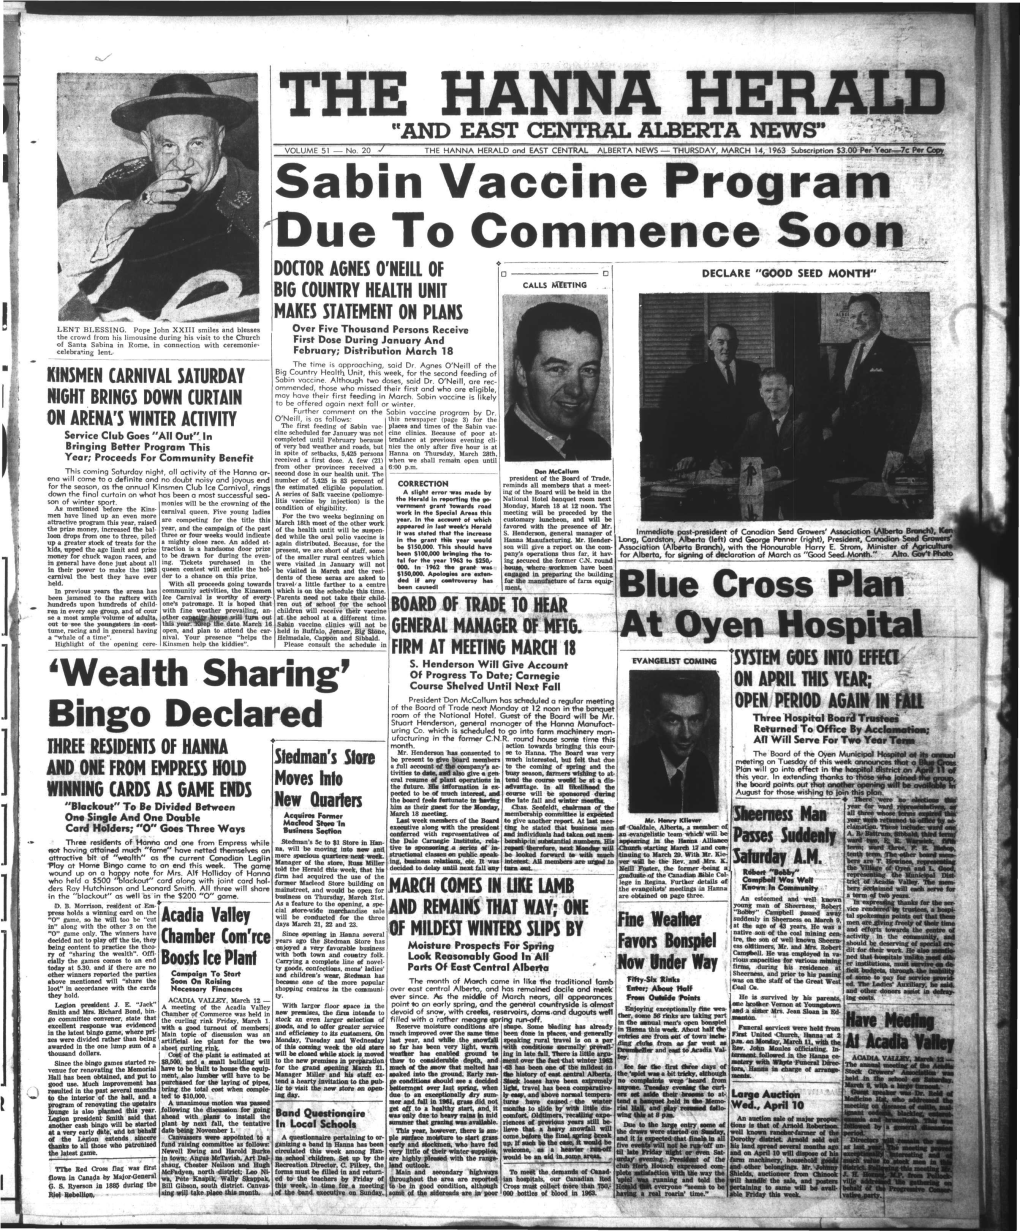 Sabin Vaccine 1 'Due to Commence S #R*